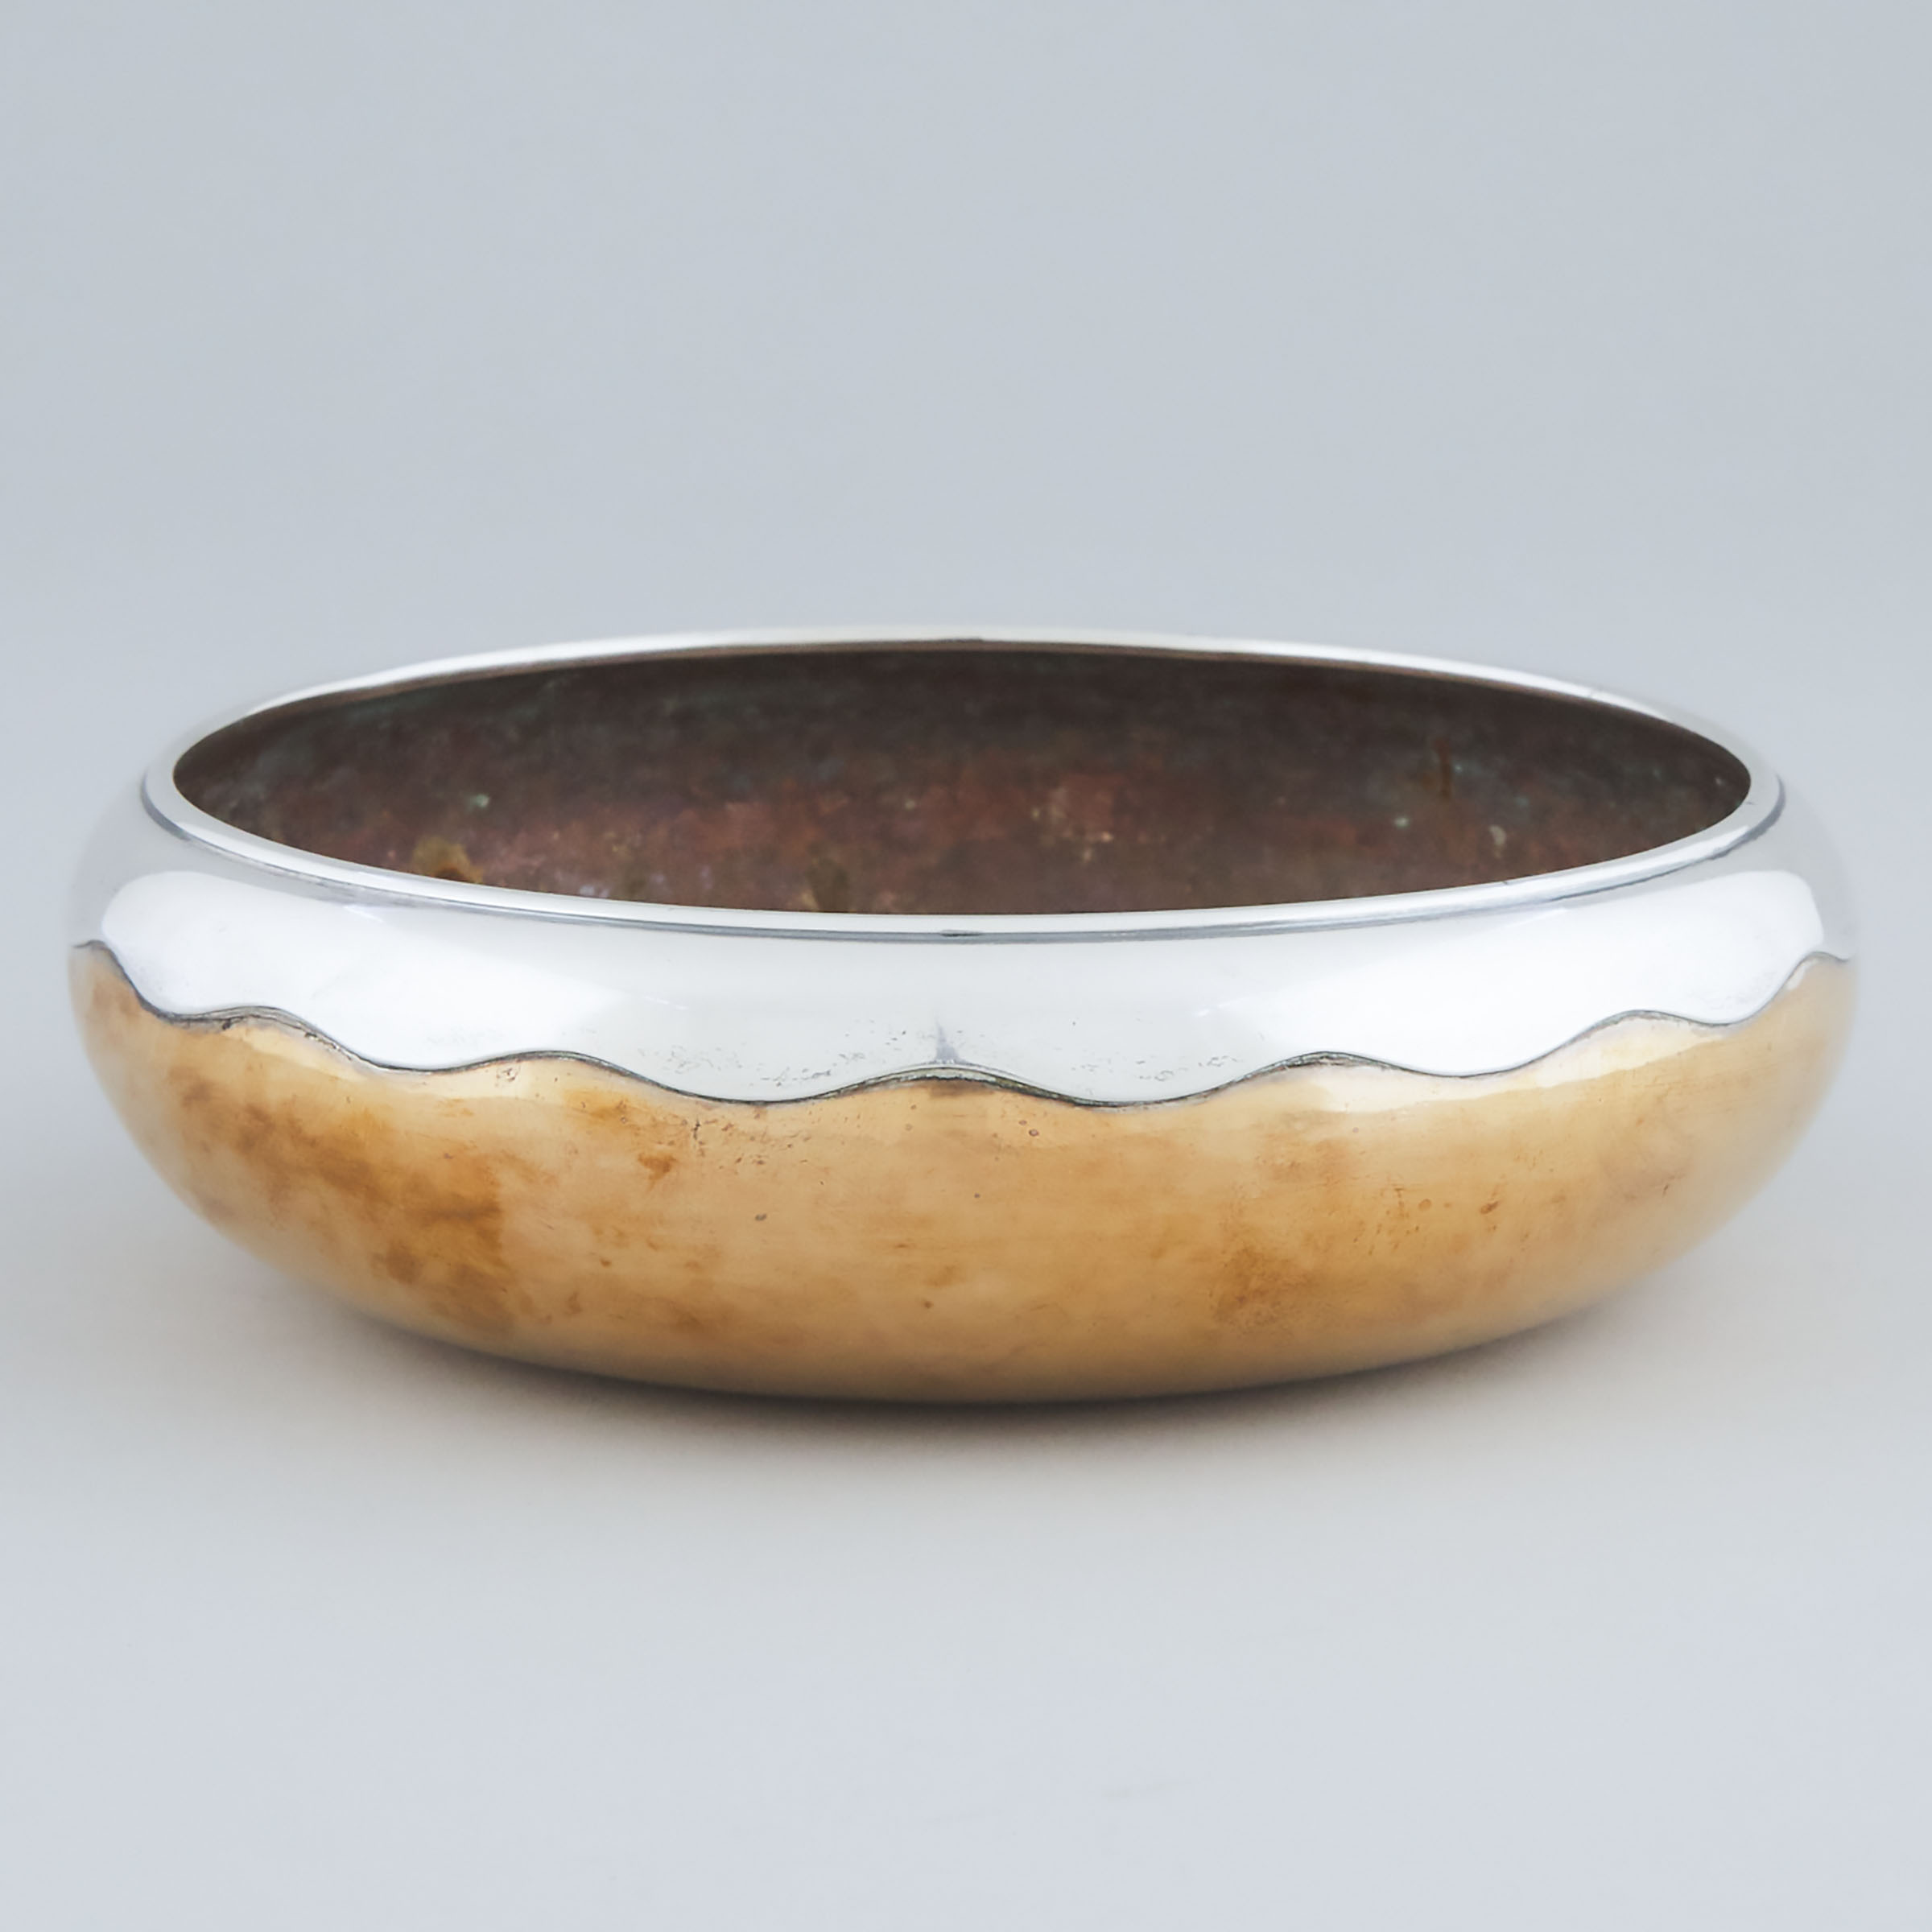 American Arts and Crafts Hammered and Silver Mounted Copper Centrepiece Bowl, early-mid 20th century